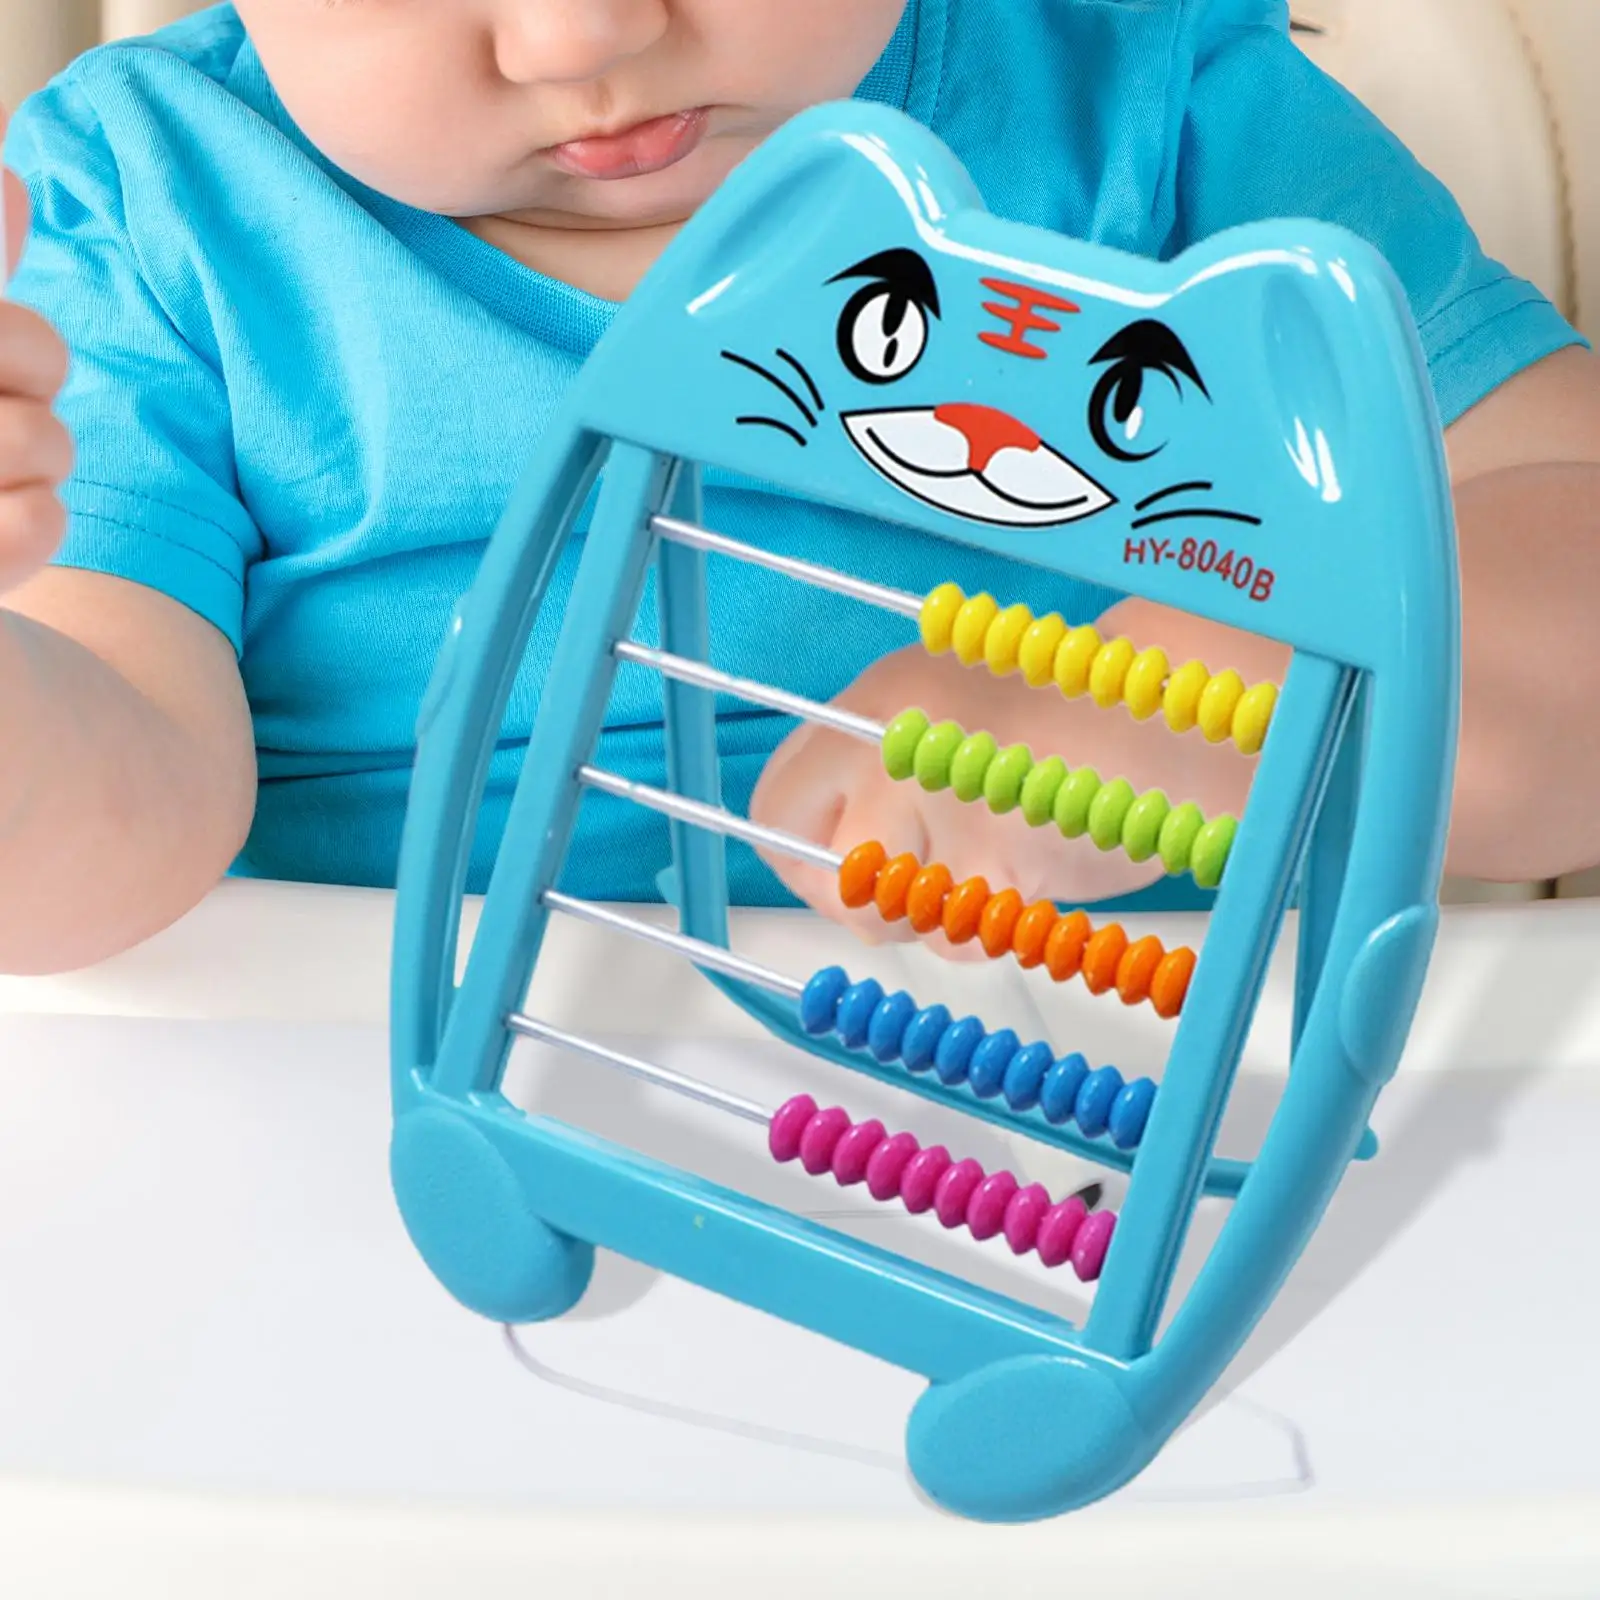 Montessori Educational Abacus Math Manipulatives Educational Counting Frames Toy Math Learning Toy for Children Birthday Gifts